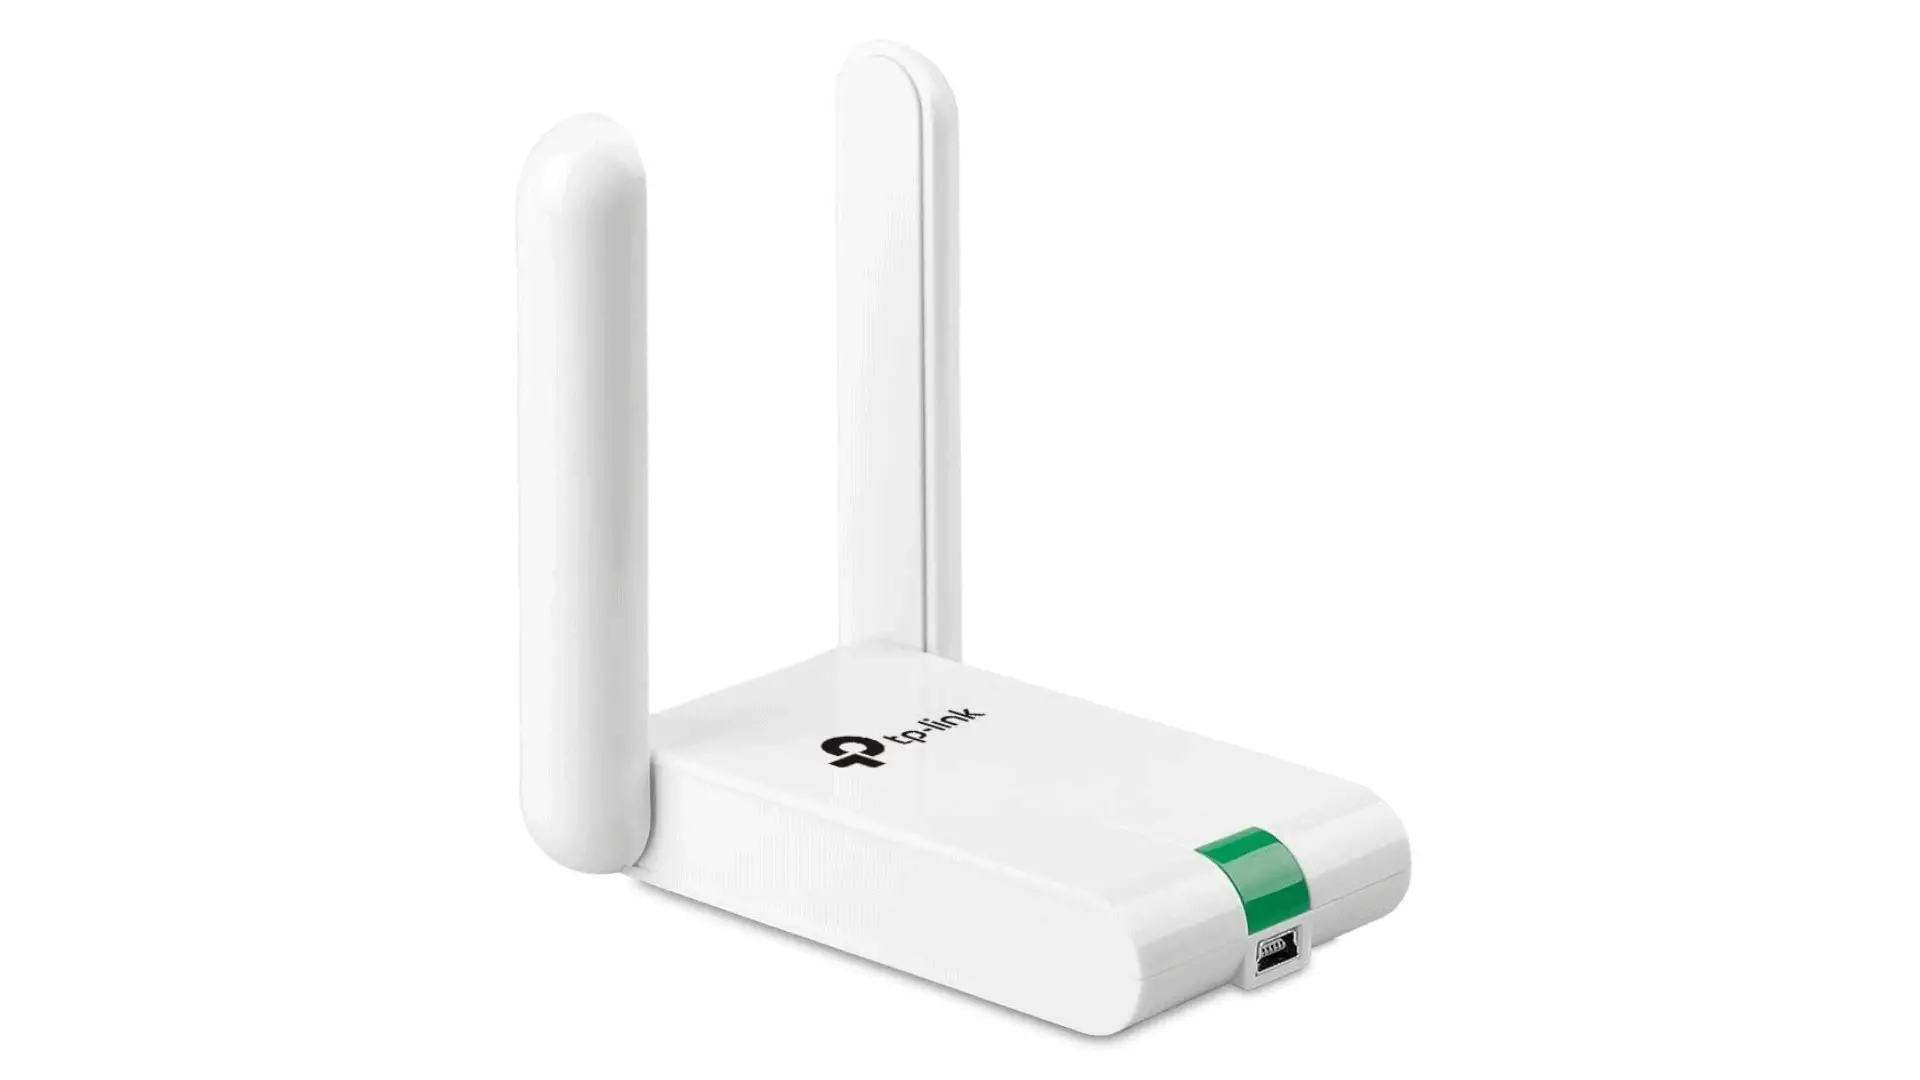 TP-Link N300 Wireless USB Adapter in white with two external antennas